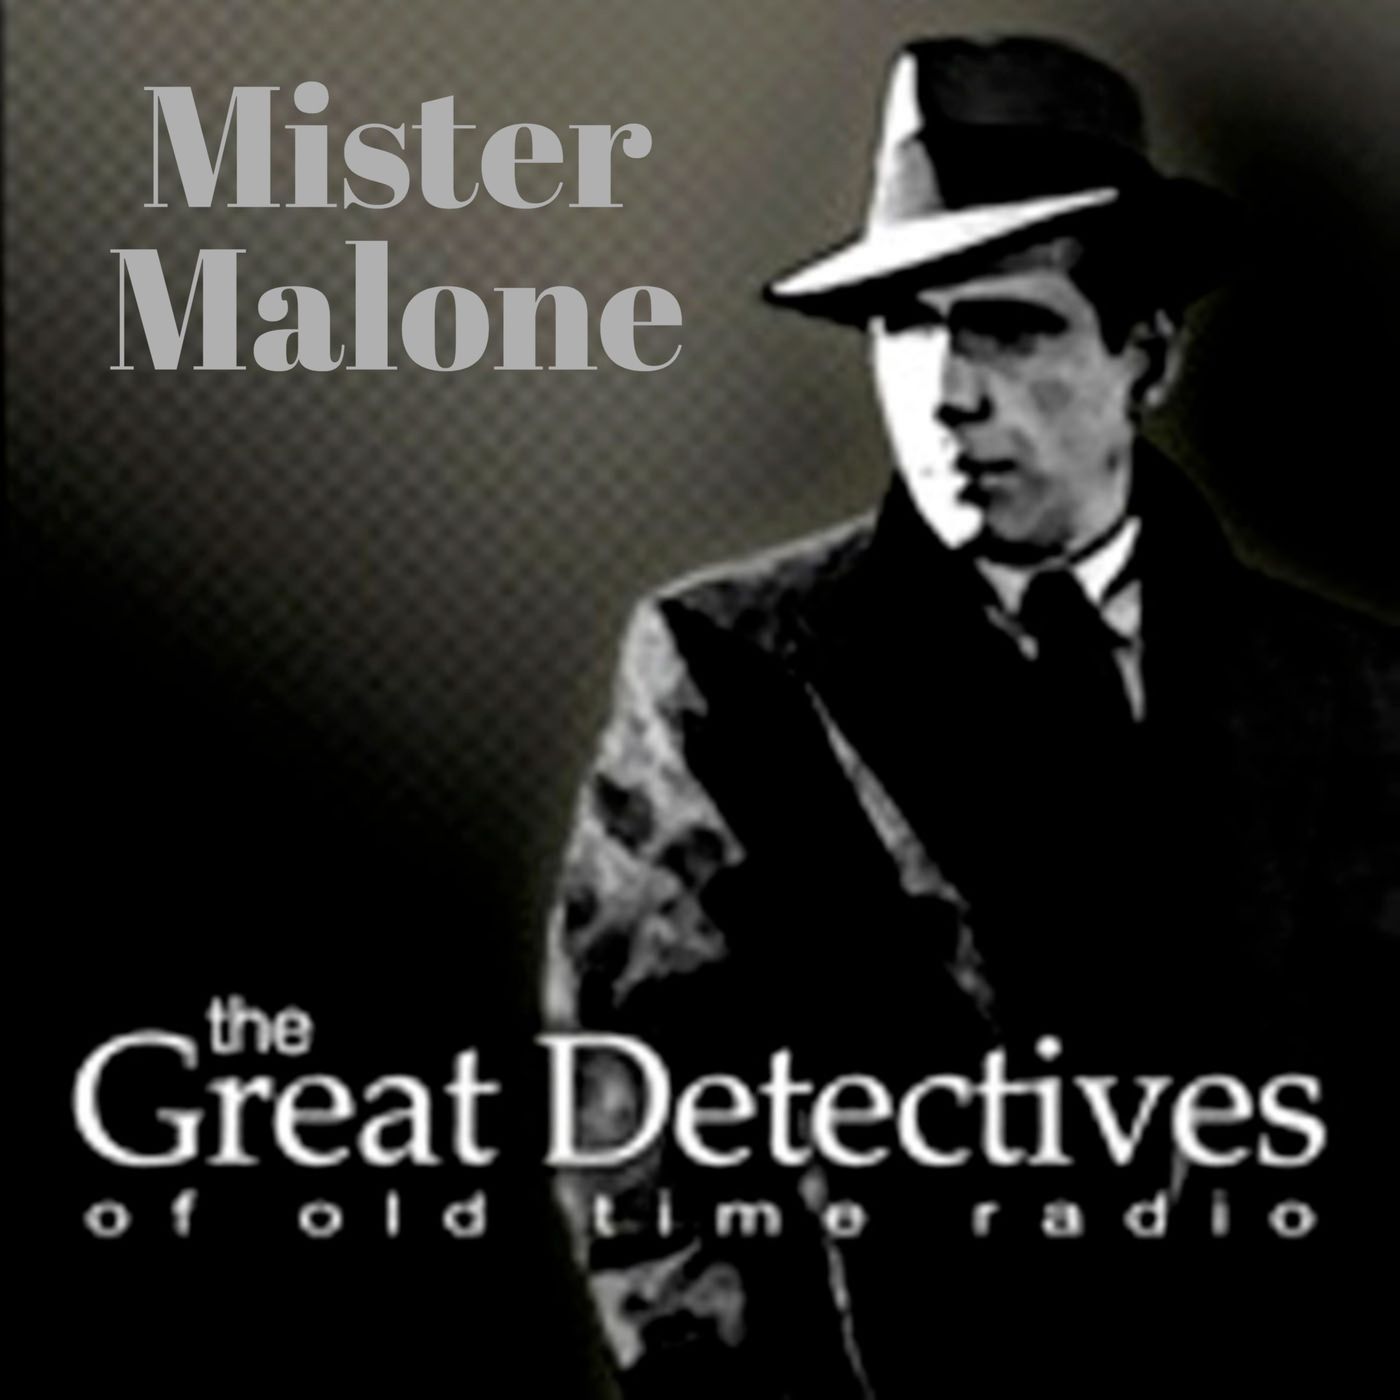 EP1060: Amazing Mr. Malone: Appearances Can Be Deceiving